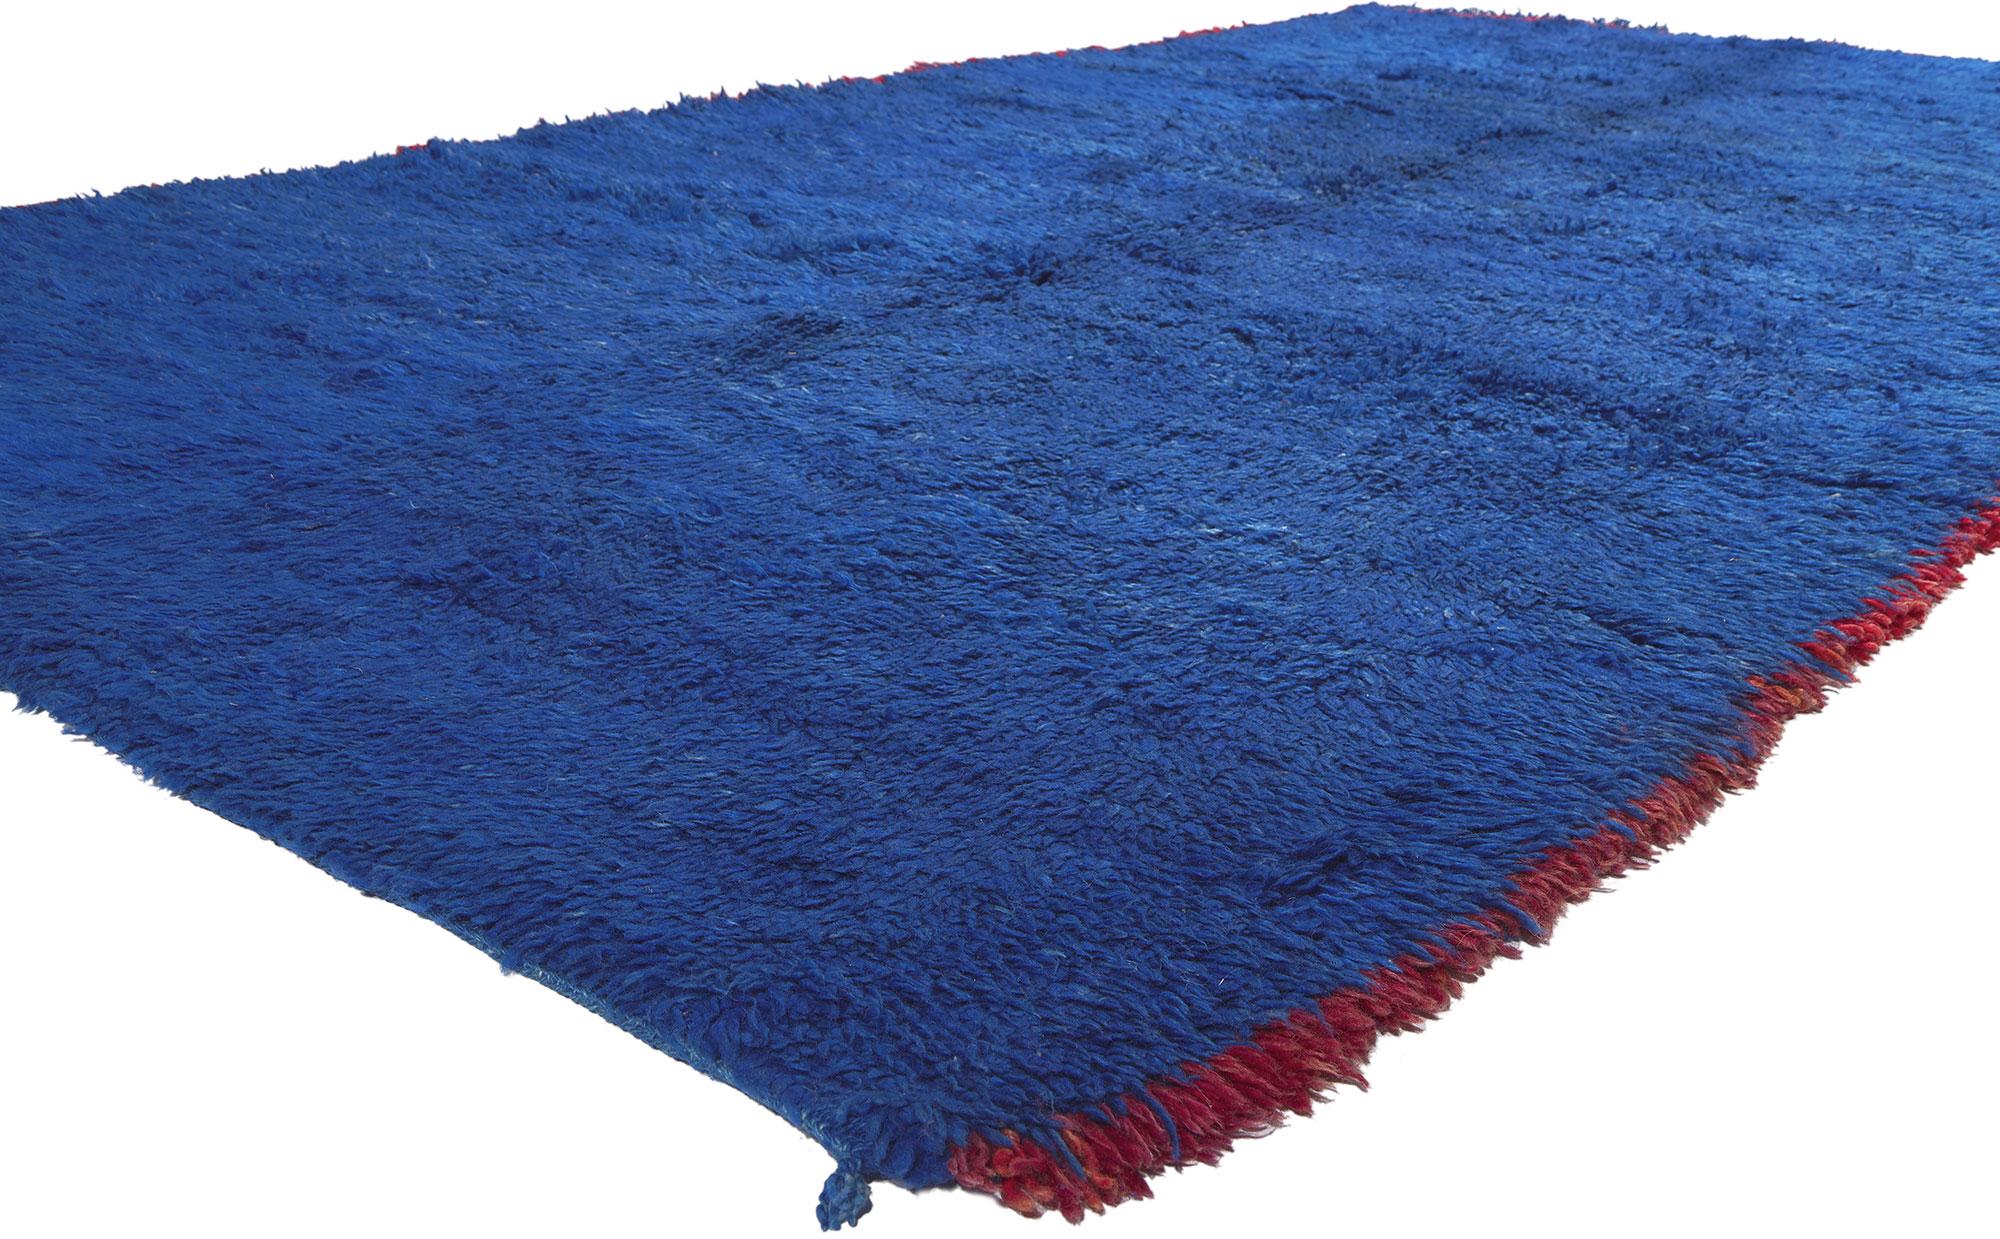 20643 Vintage Blue Beni MGuild Moroccan Rug, 06'08 x 12'07. In the serene world of Shibui aesthetics, behold this hand-knotted wool vintage blue Beni Mguild Moroccan rug—a masterpiece from the western central Middle Atlas, meticulously crafted by